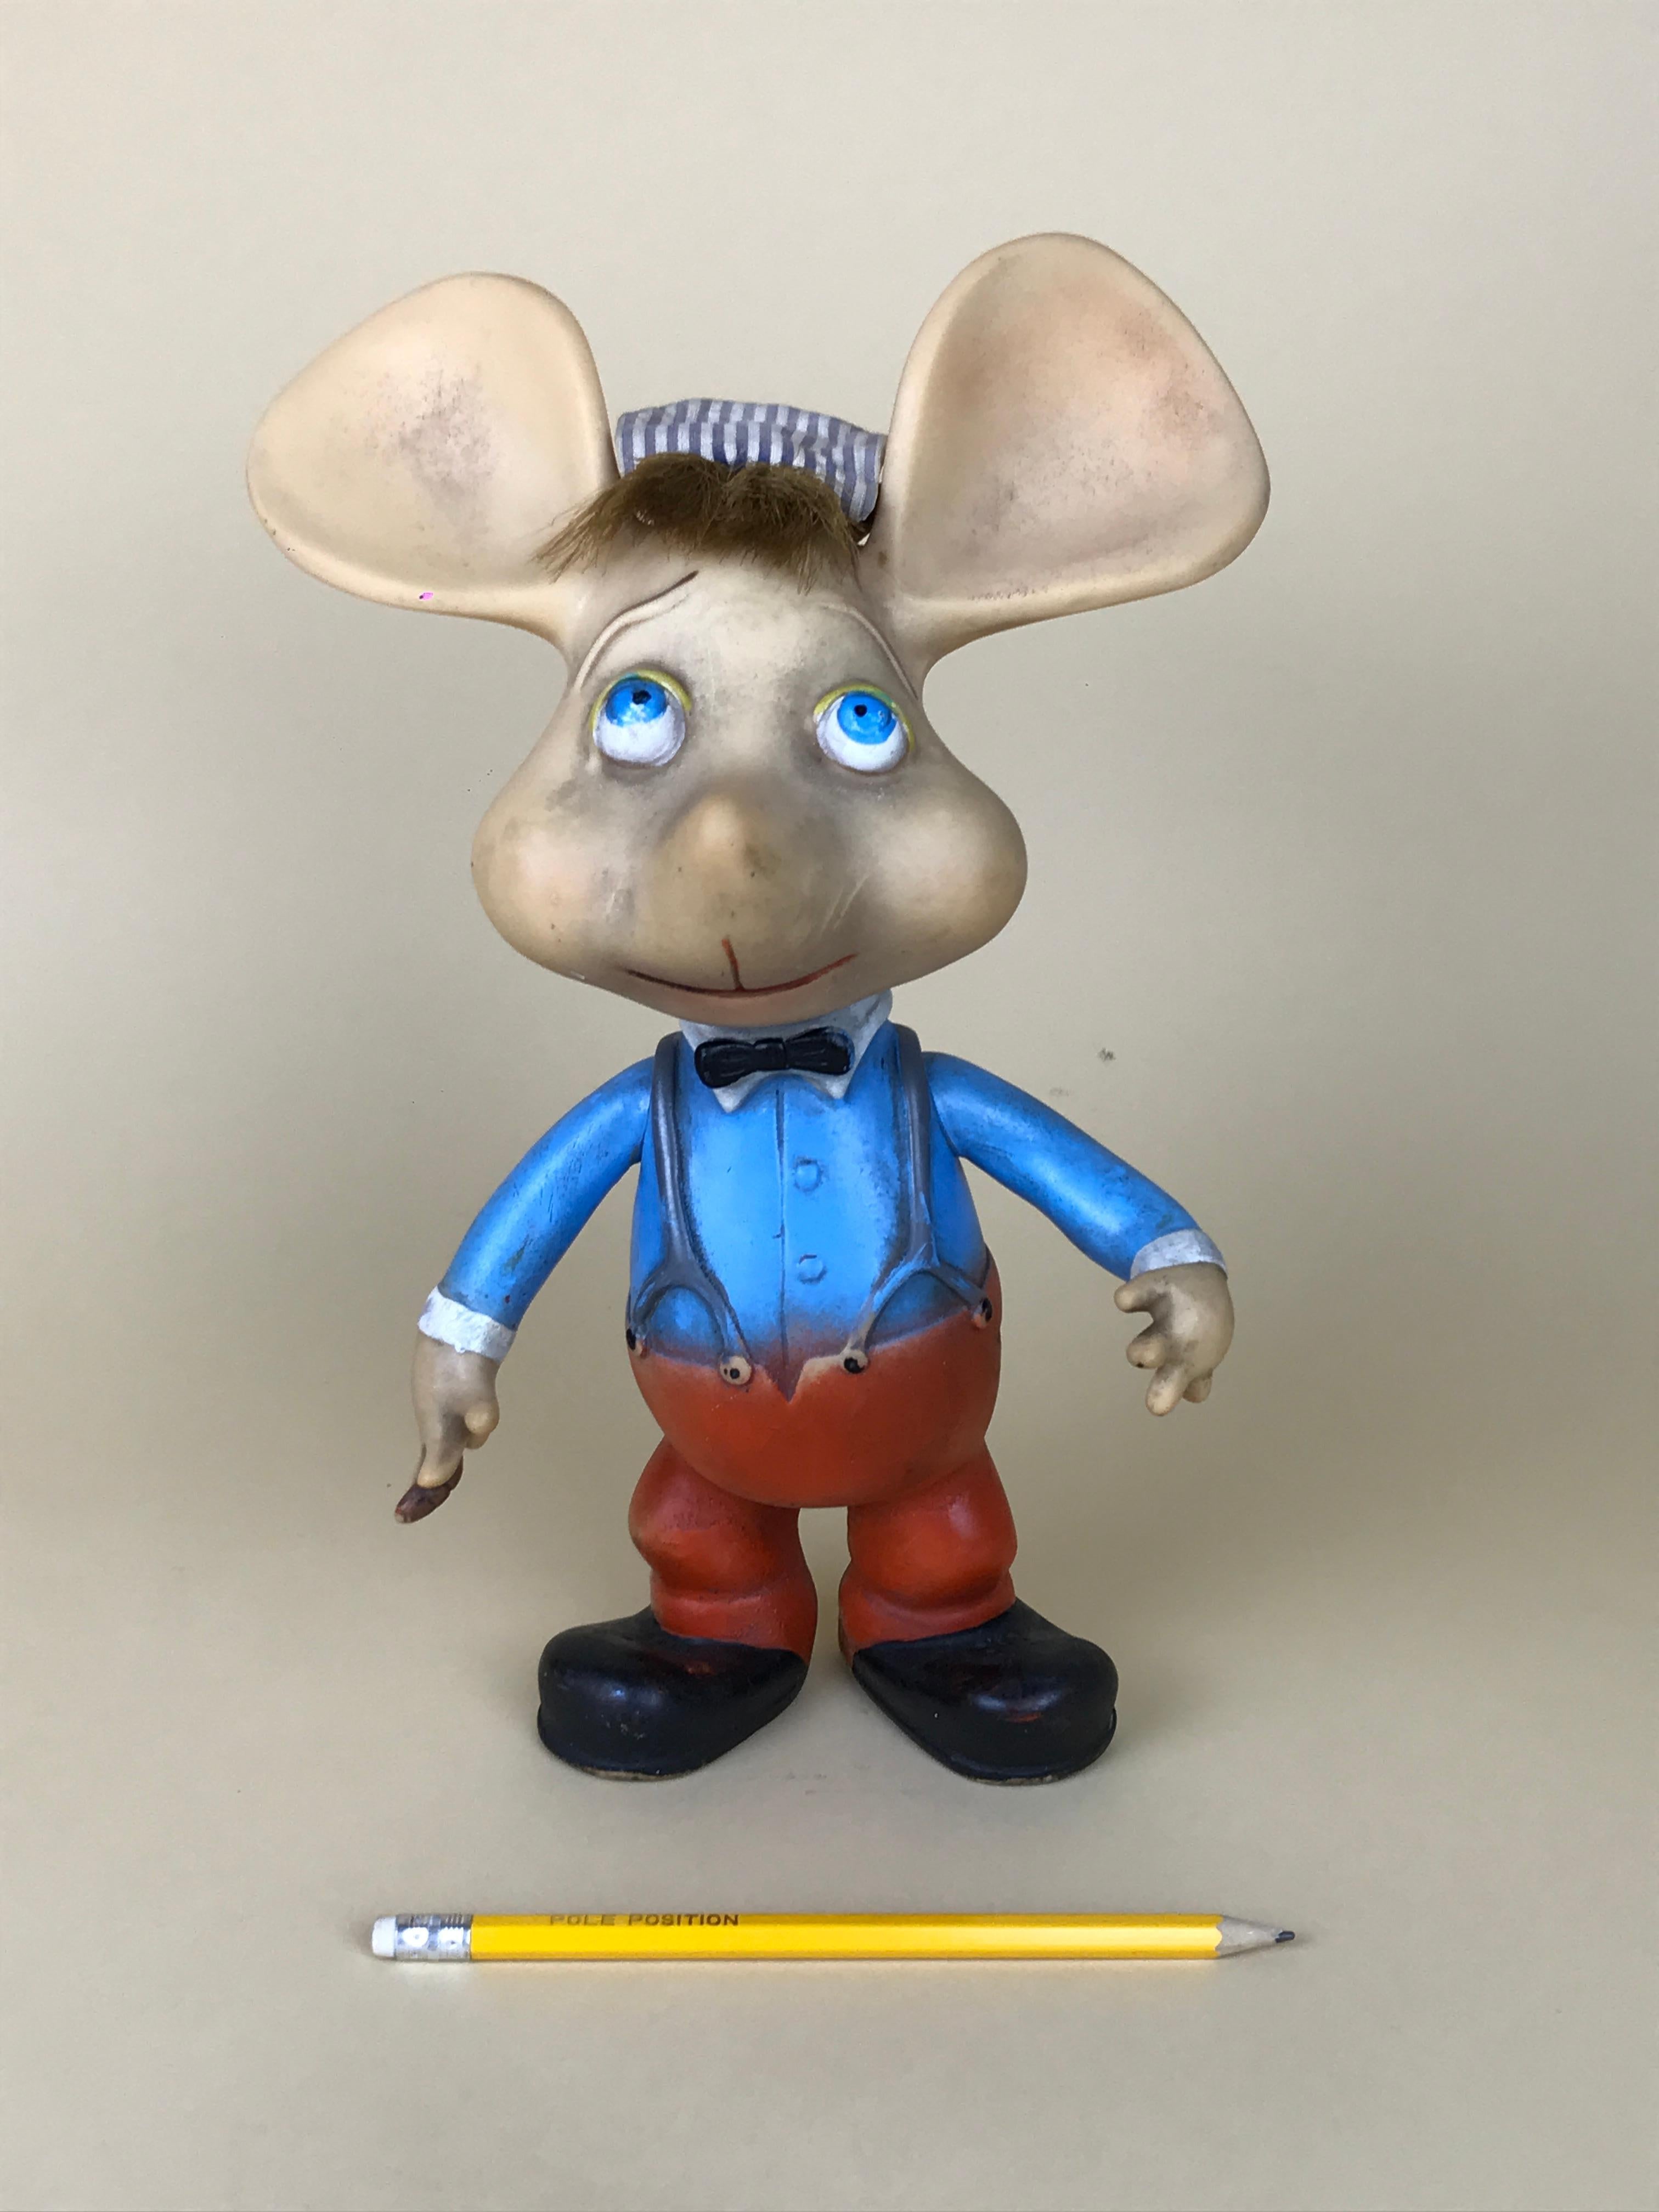 1960s iconic Topo Gigio mouse rubber squeak toy made in Italy, designed by Maria Perego in 1958.

The toy has the fabric original hat and movable arms.

Collector's note:

Topo Gigio Mouse was the lead character of a children's puppet show on